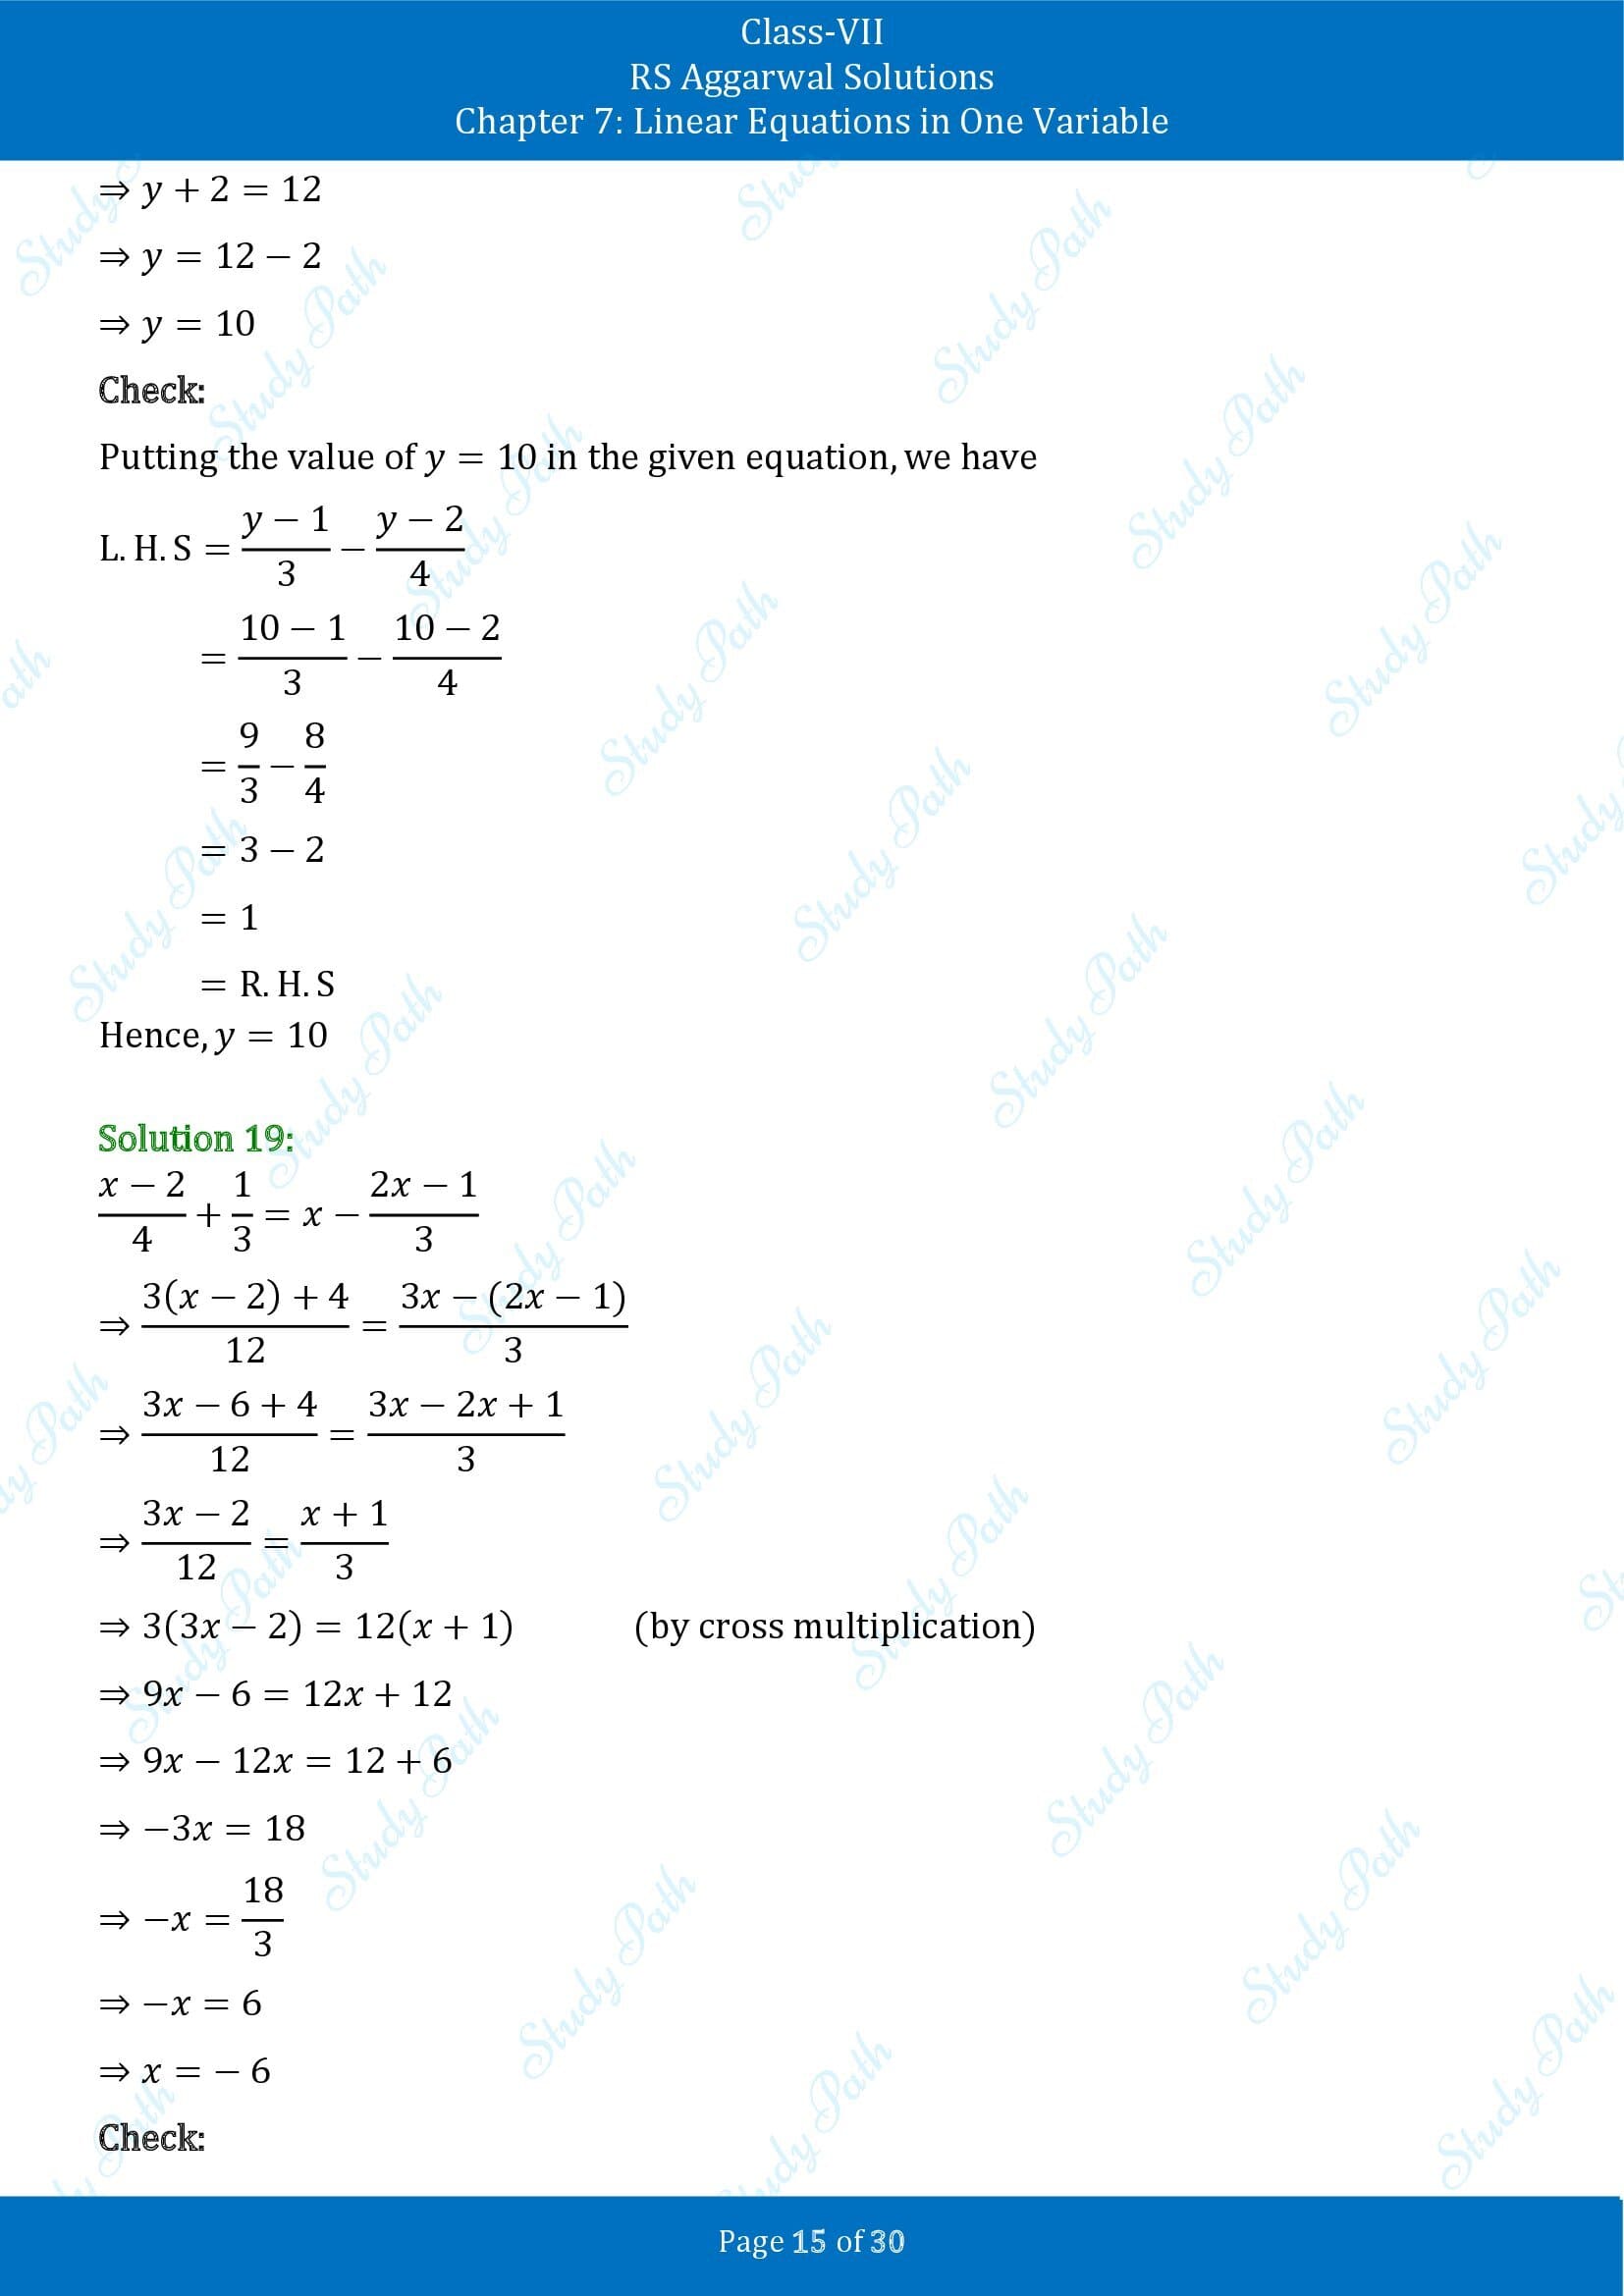 RS Aggarwal Solutions Class 7 Chapter 7 Linear Equations in One Variable Exercise 7A 00015